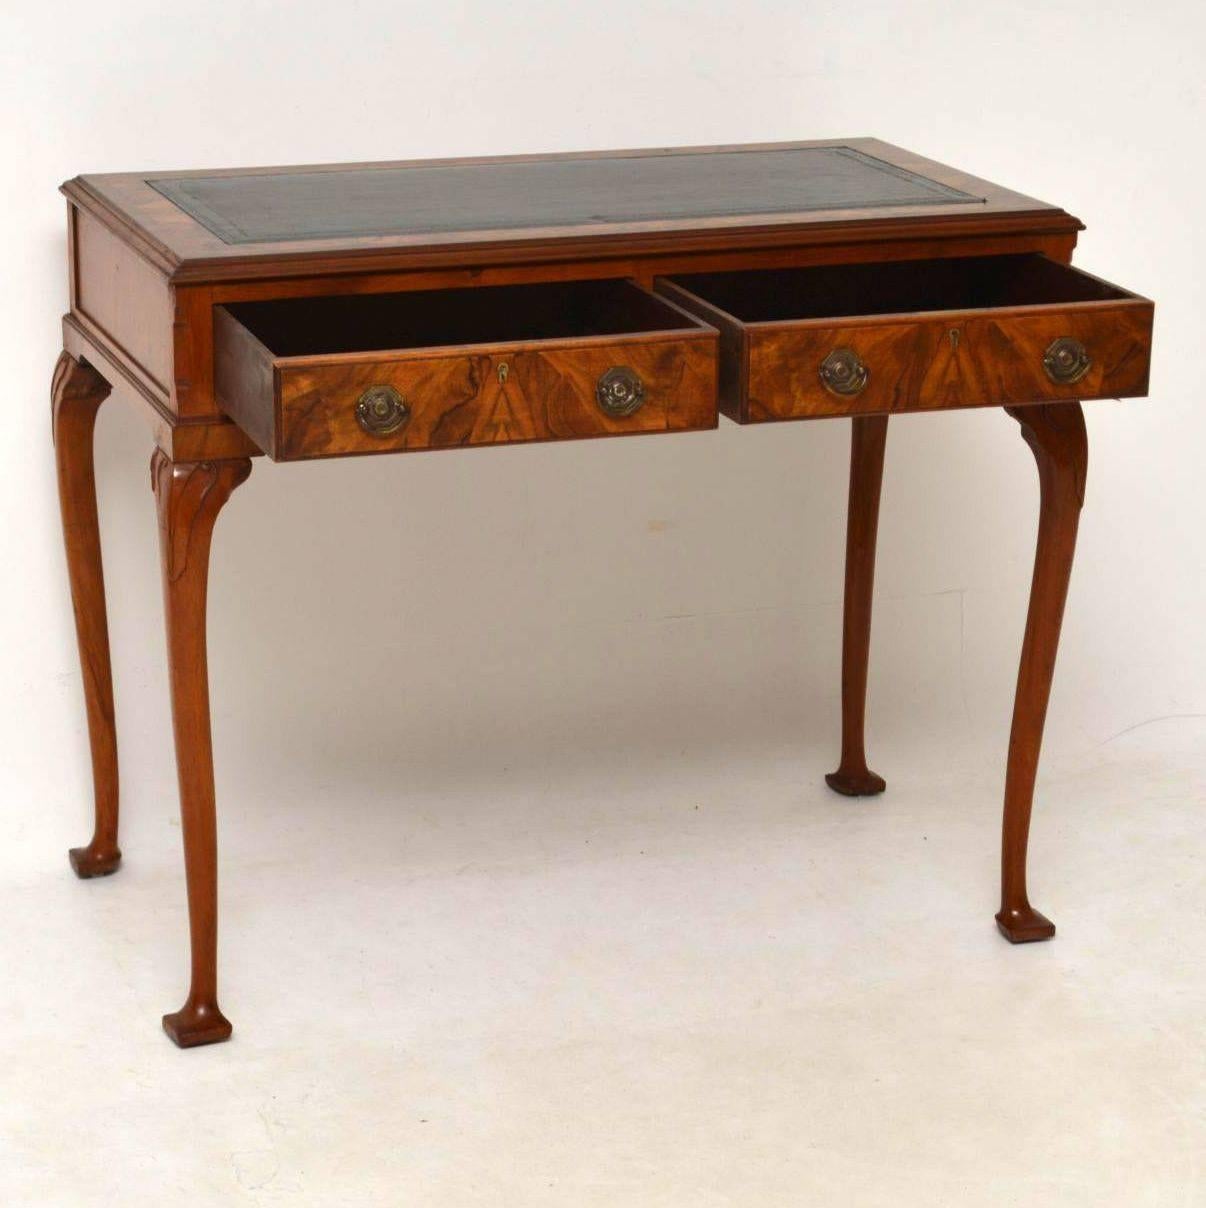 This antique walnut writing table or desk is fabulous quality & has some fine details. It’s in excellent condition & I would date this desk to around the 1910 period. It has a tooled leather writing surface, flanked by burr walnut & a